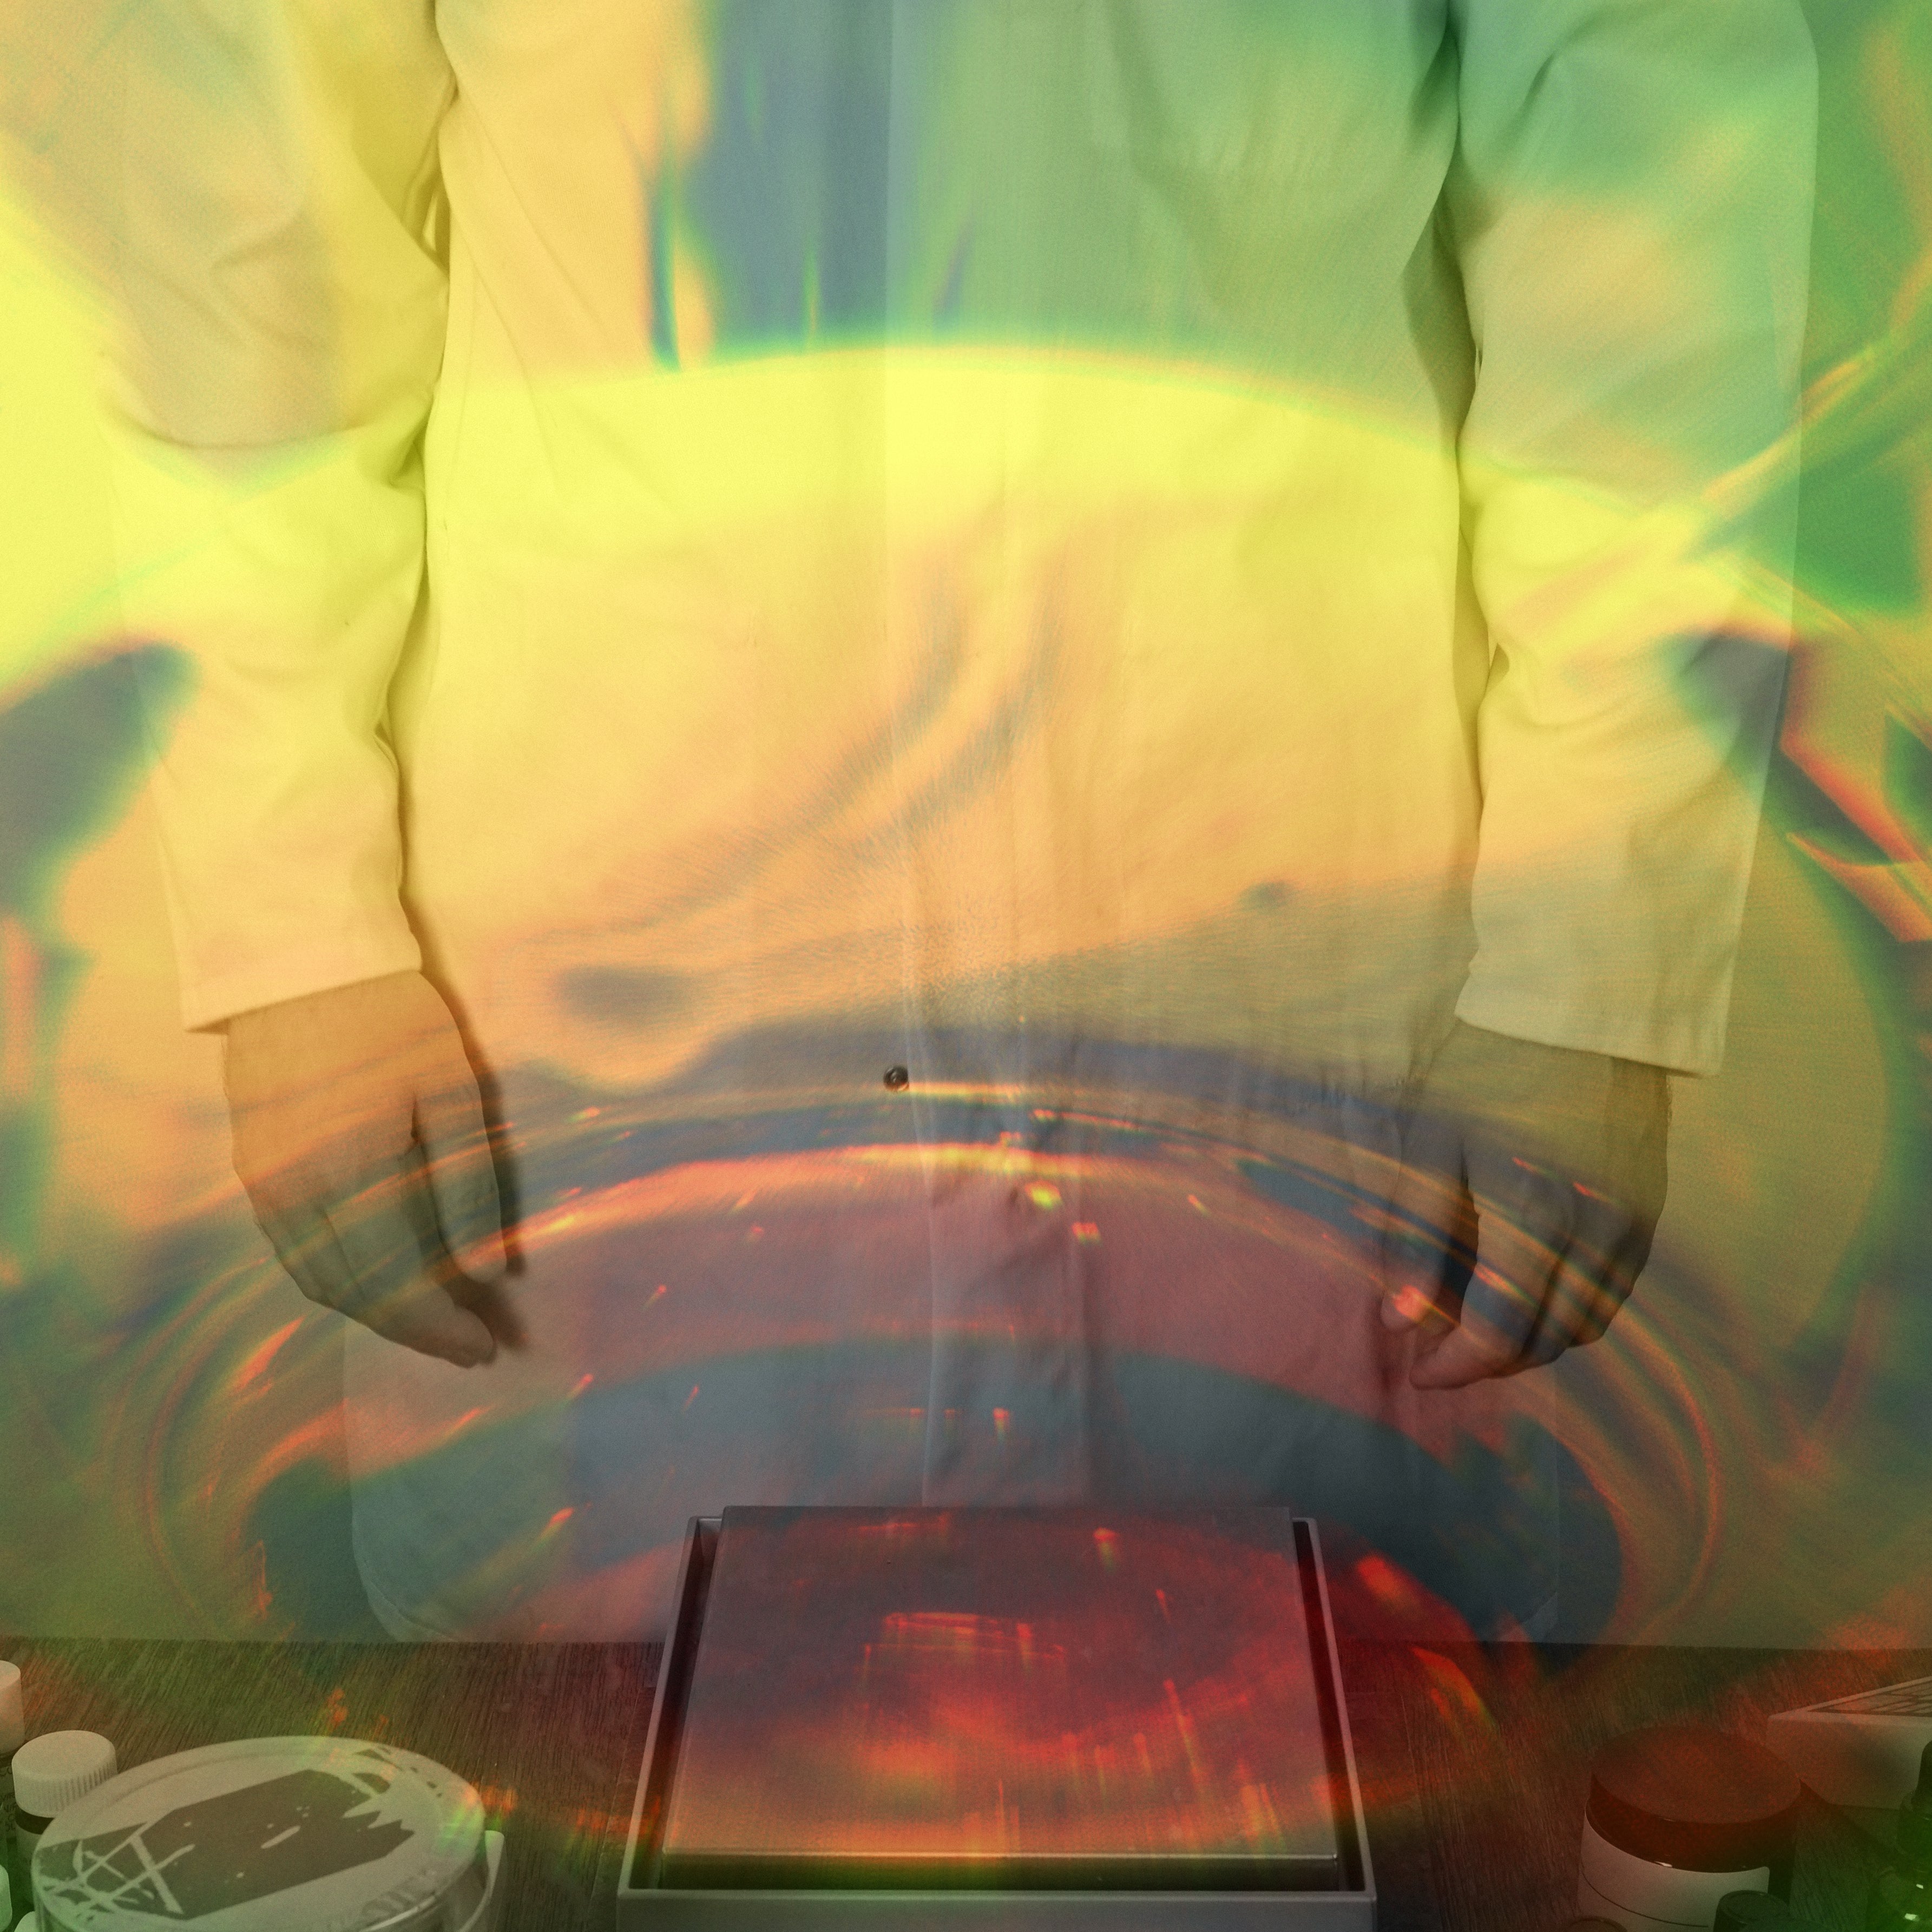 Perfumer in white lab coat overlaid with abstract image of whisky glass